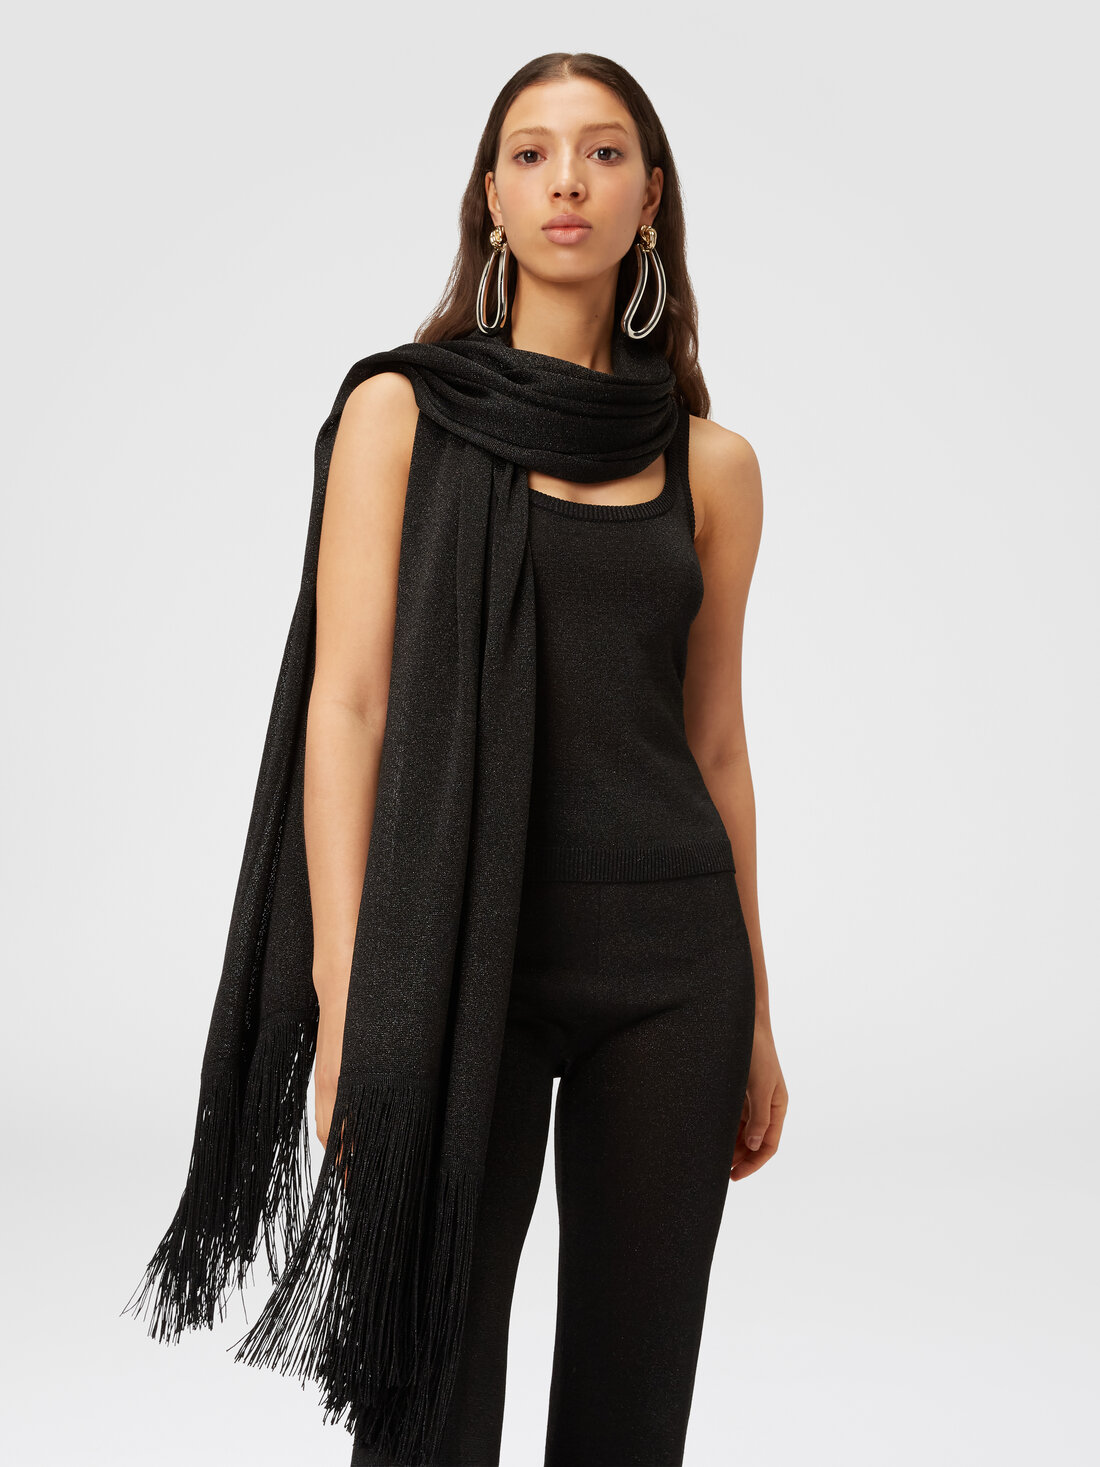 Viscose and nylon knit stole with fringes, Multicoloured  - 8053147142371 - 2